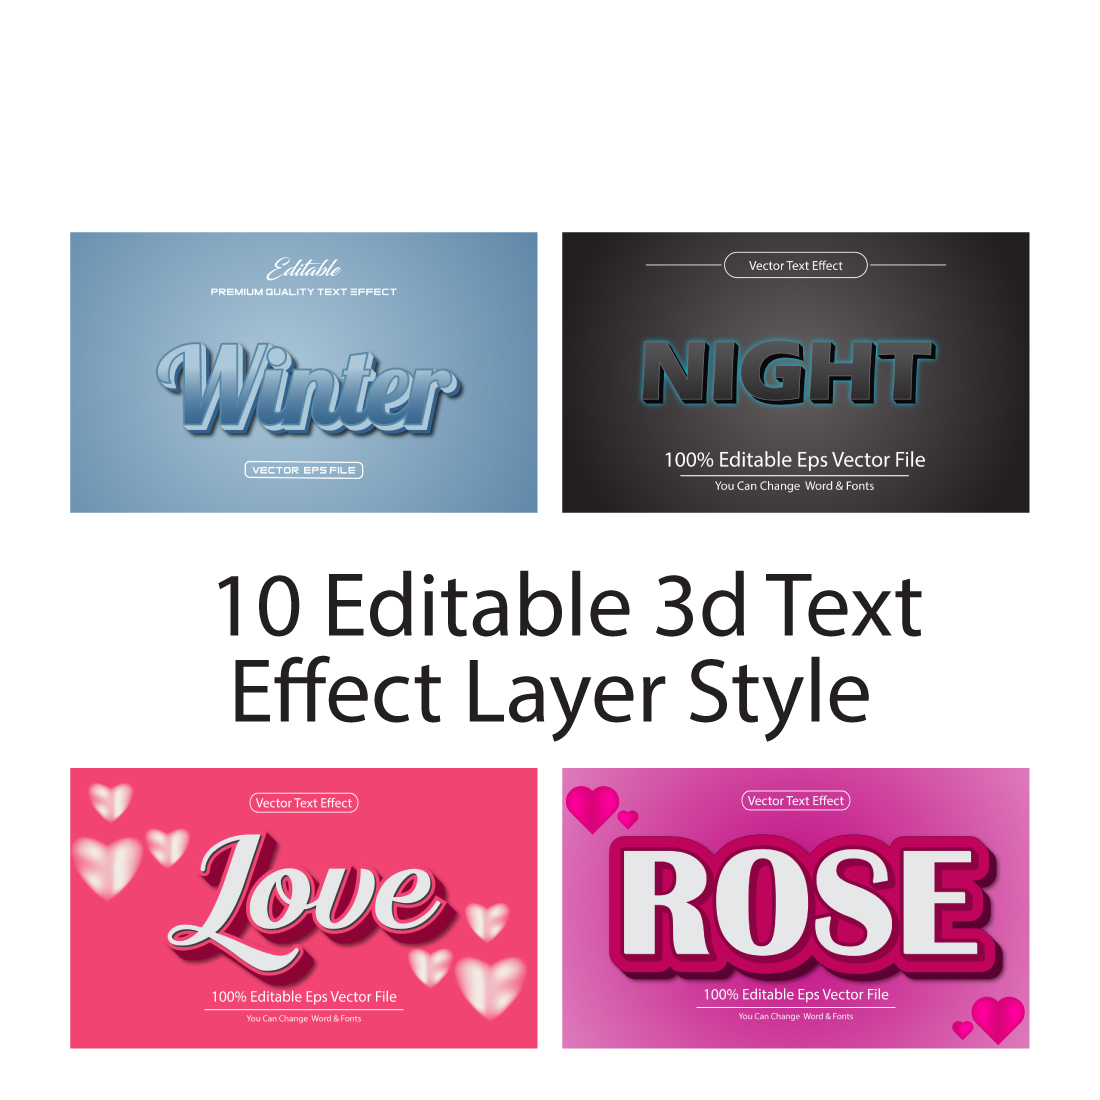 10 Editable 3D Text Effect Layer Style image preview.